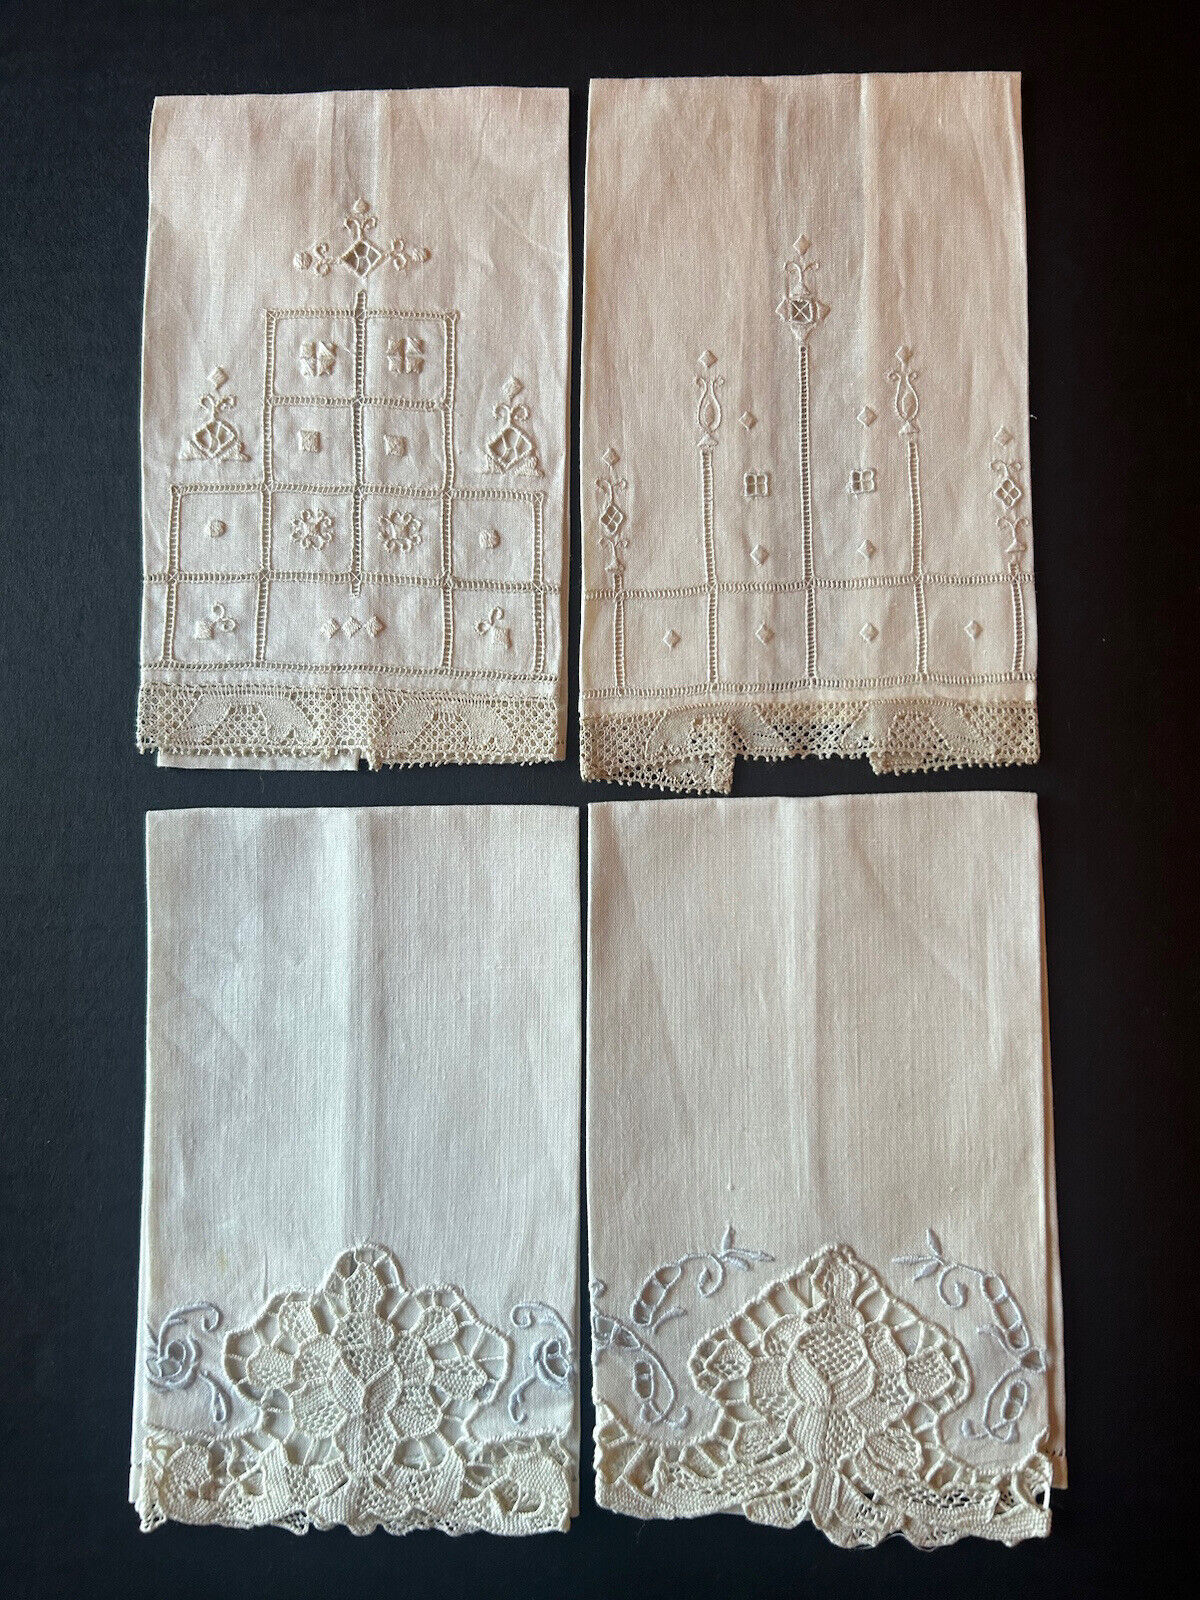 4 Antique White Linen FINGERTIP TOWELS Embroidered, Open Weave, Cut-Work, Lace